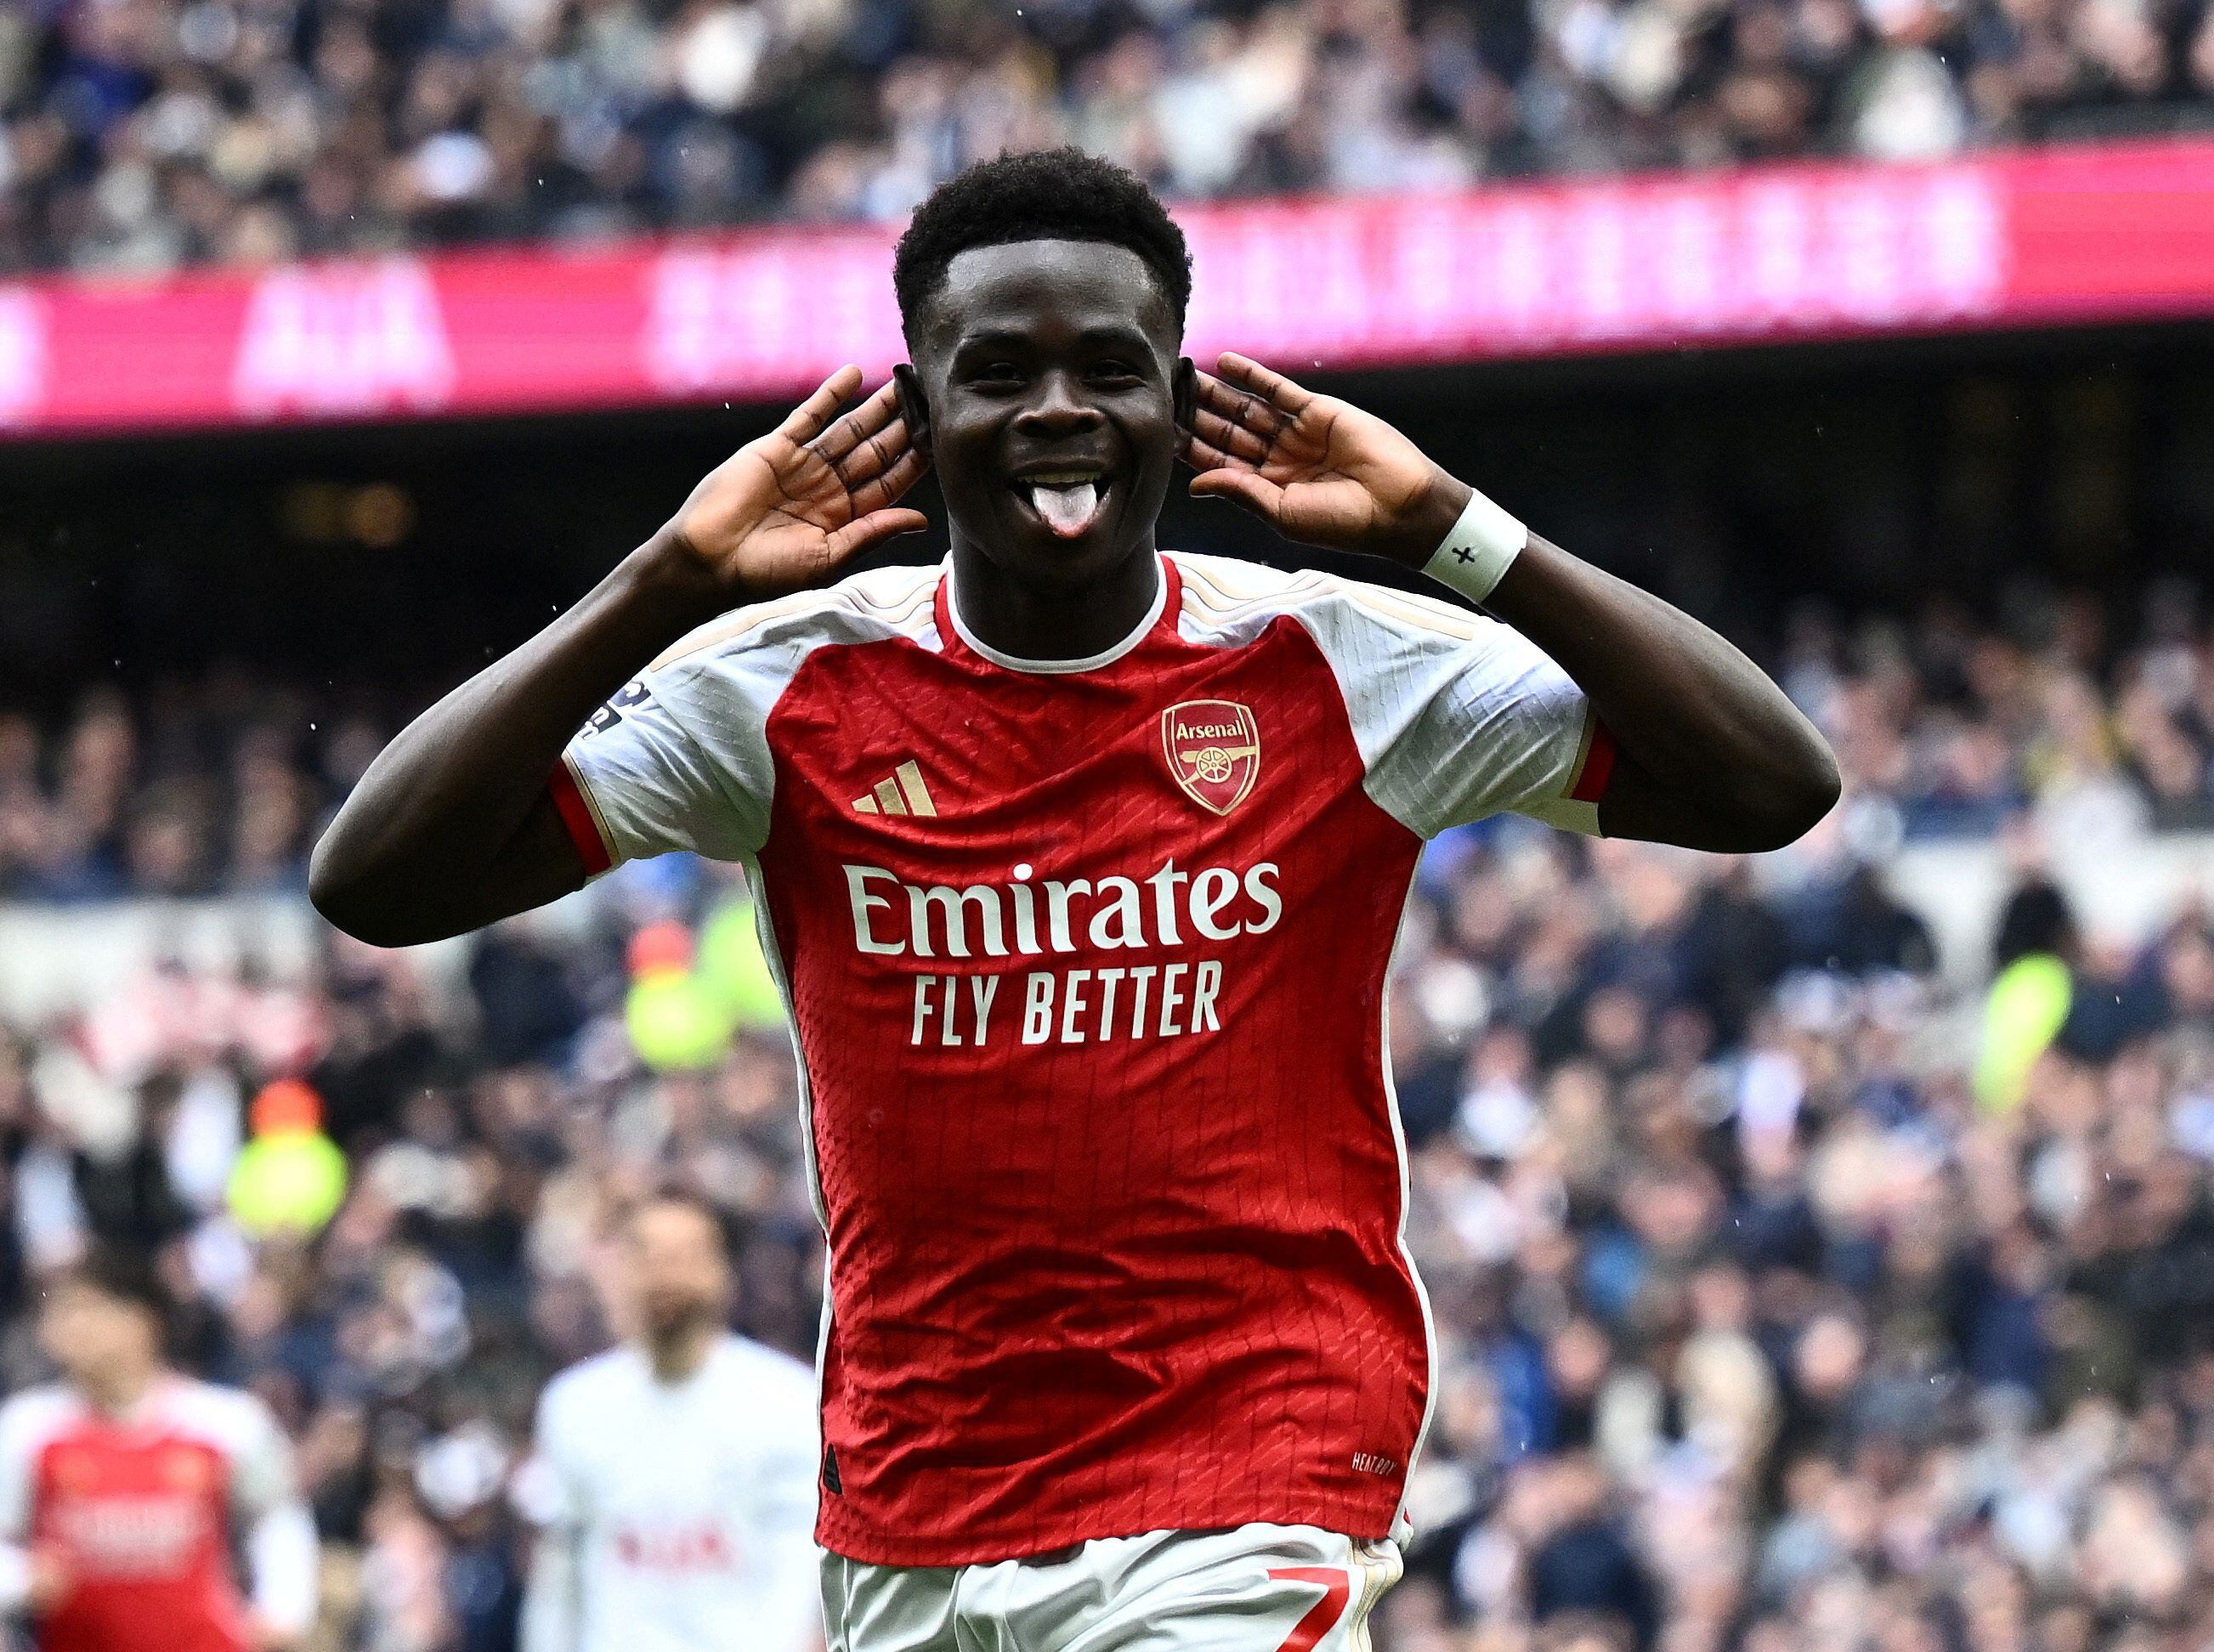 arsenal hold on for nervy north london derby win over tottenham hotspur